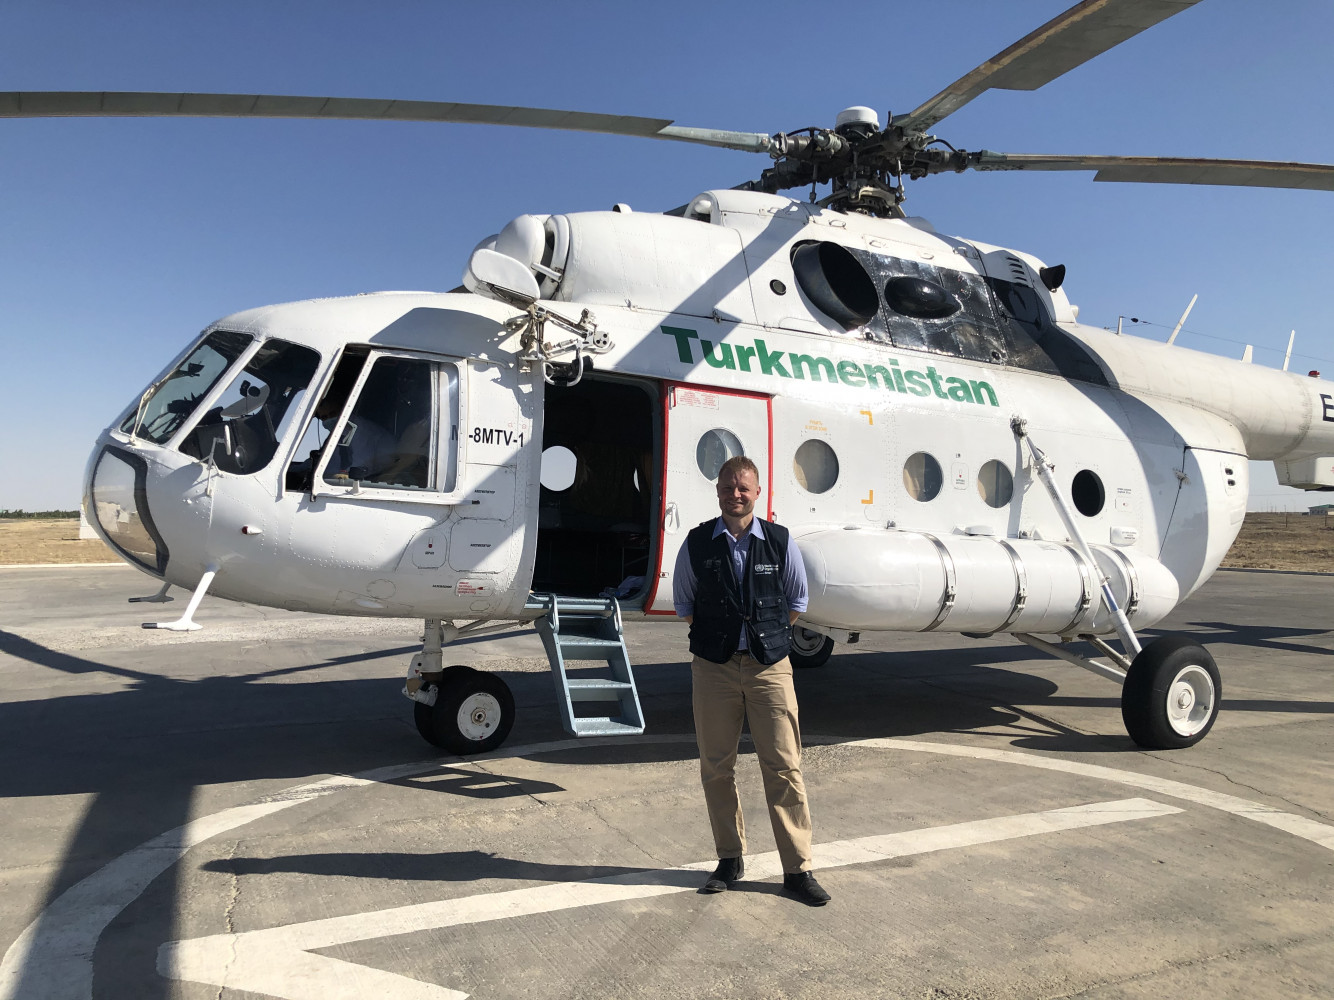 Dr Fielding in front of our helicopter transport to the Turkmenistan border crossing with Afghanistan.